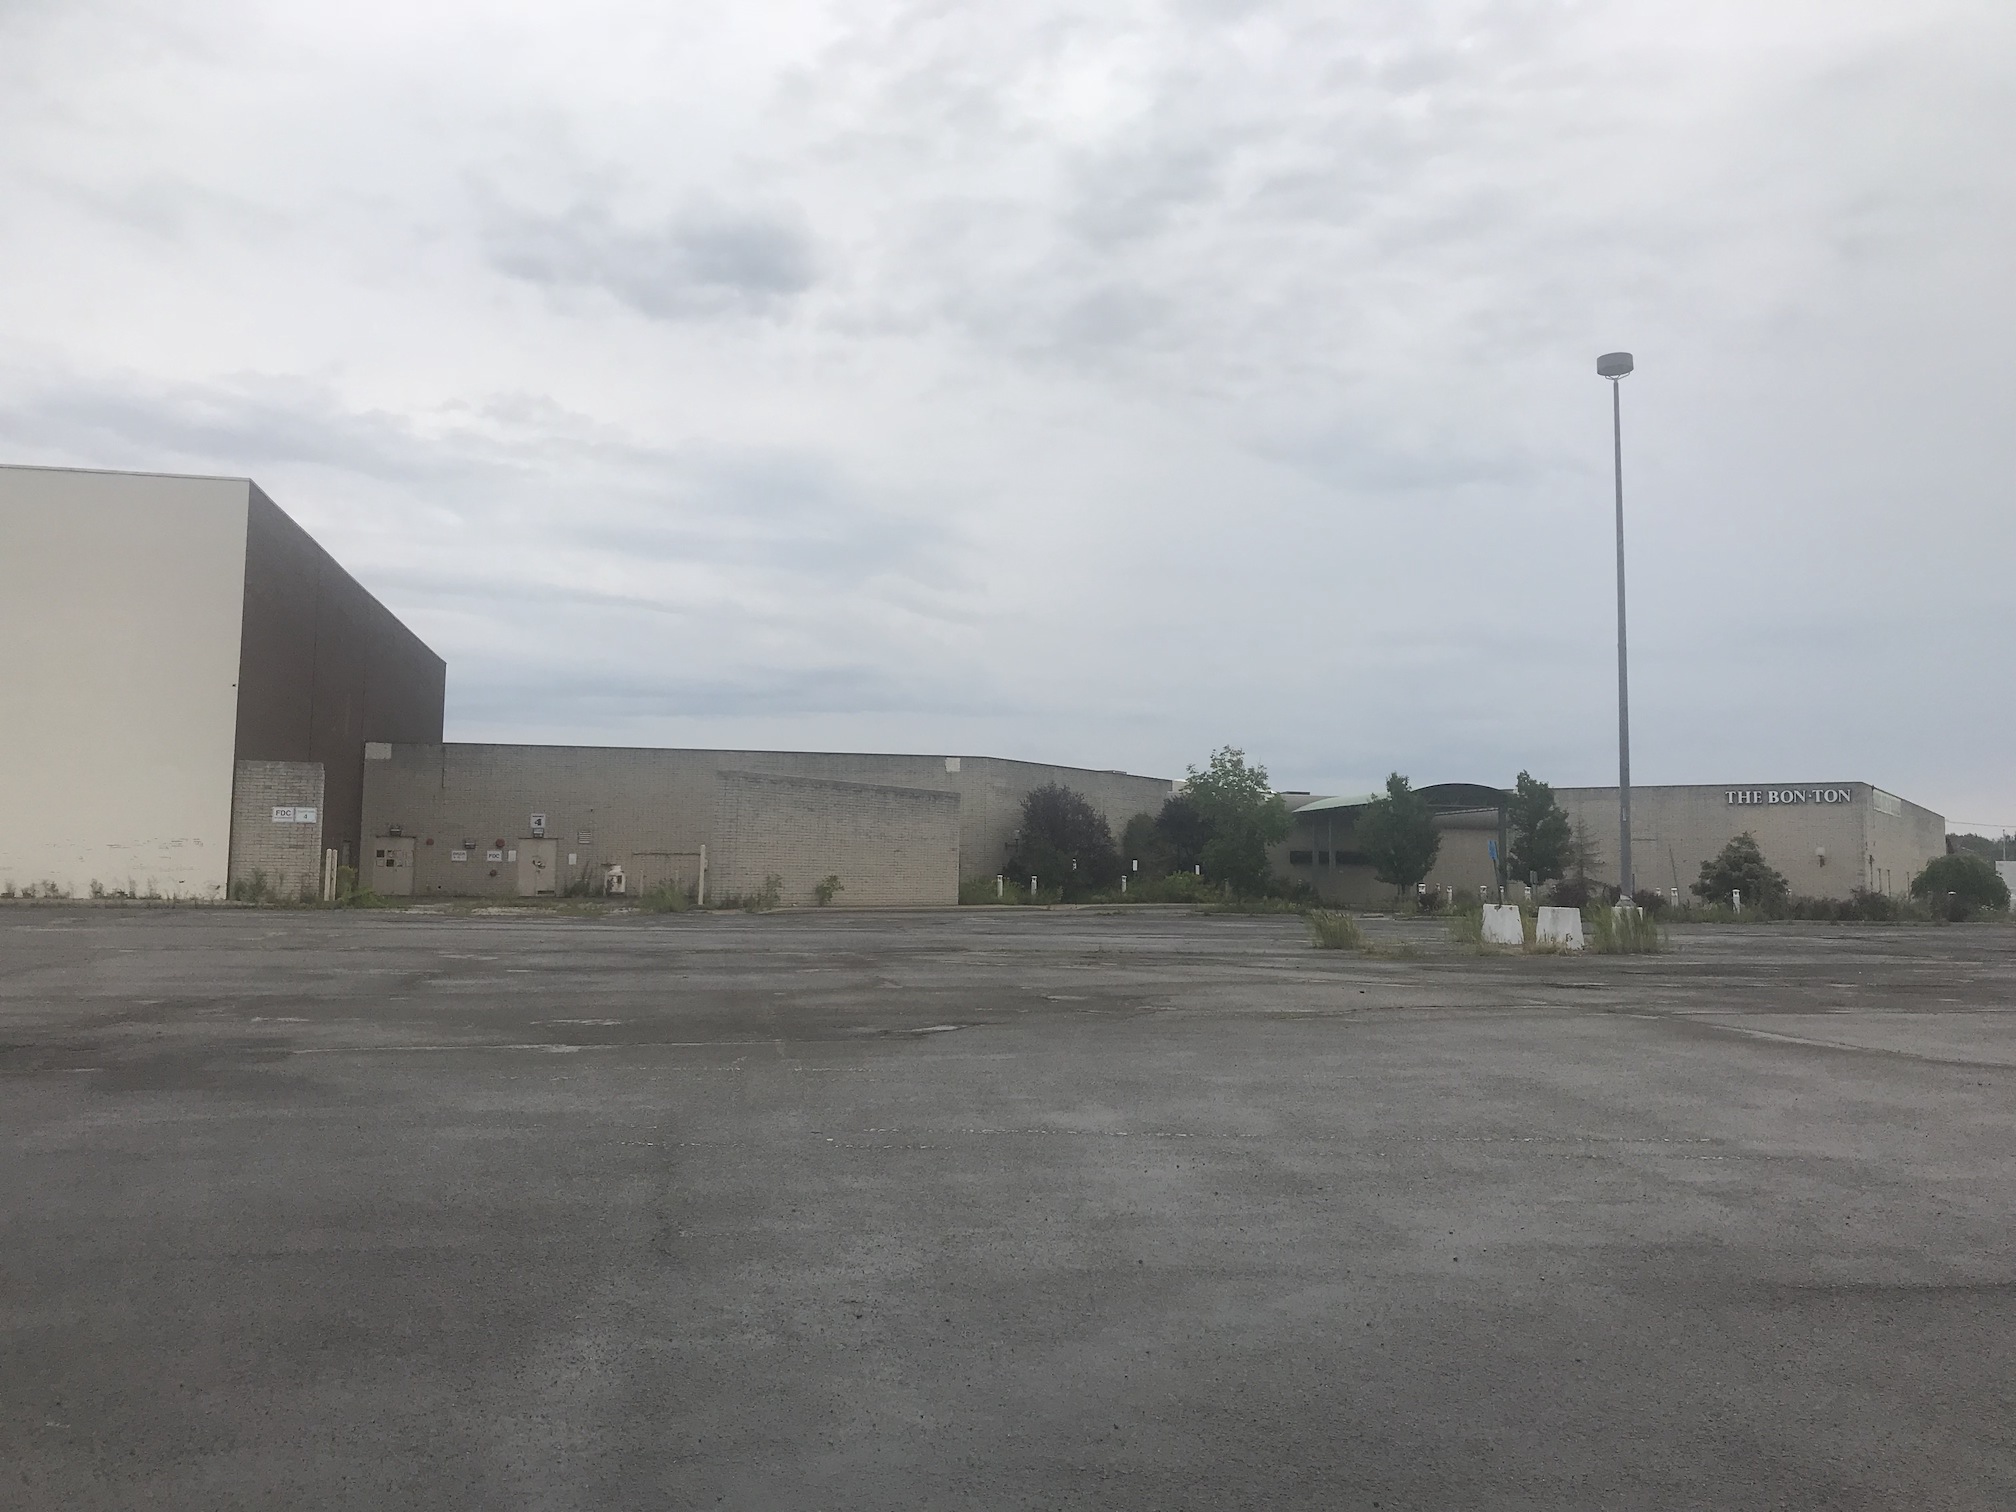 Scenes from outside the vacant Summit Mall. The Bon Ton closed its doors this week, while Sears closed earlier this month, and all other tenants ended operations several years ago. (Photos by David Yarger)